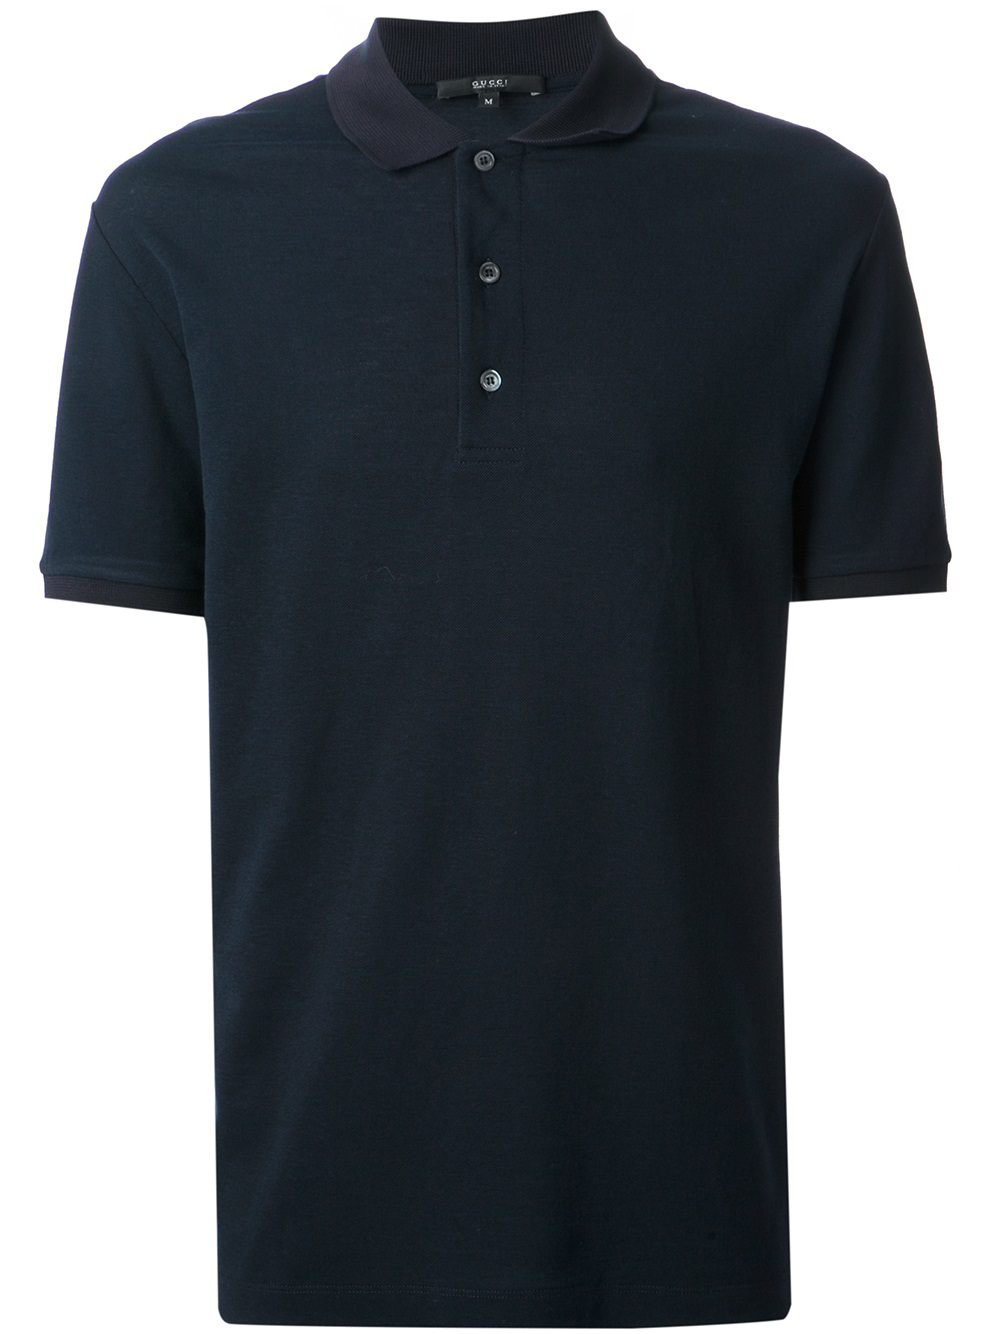 Gucci Classic Polo Shirt in Blue for Men - Lyst